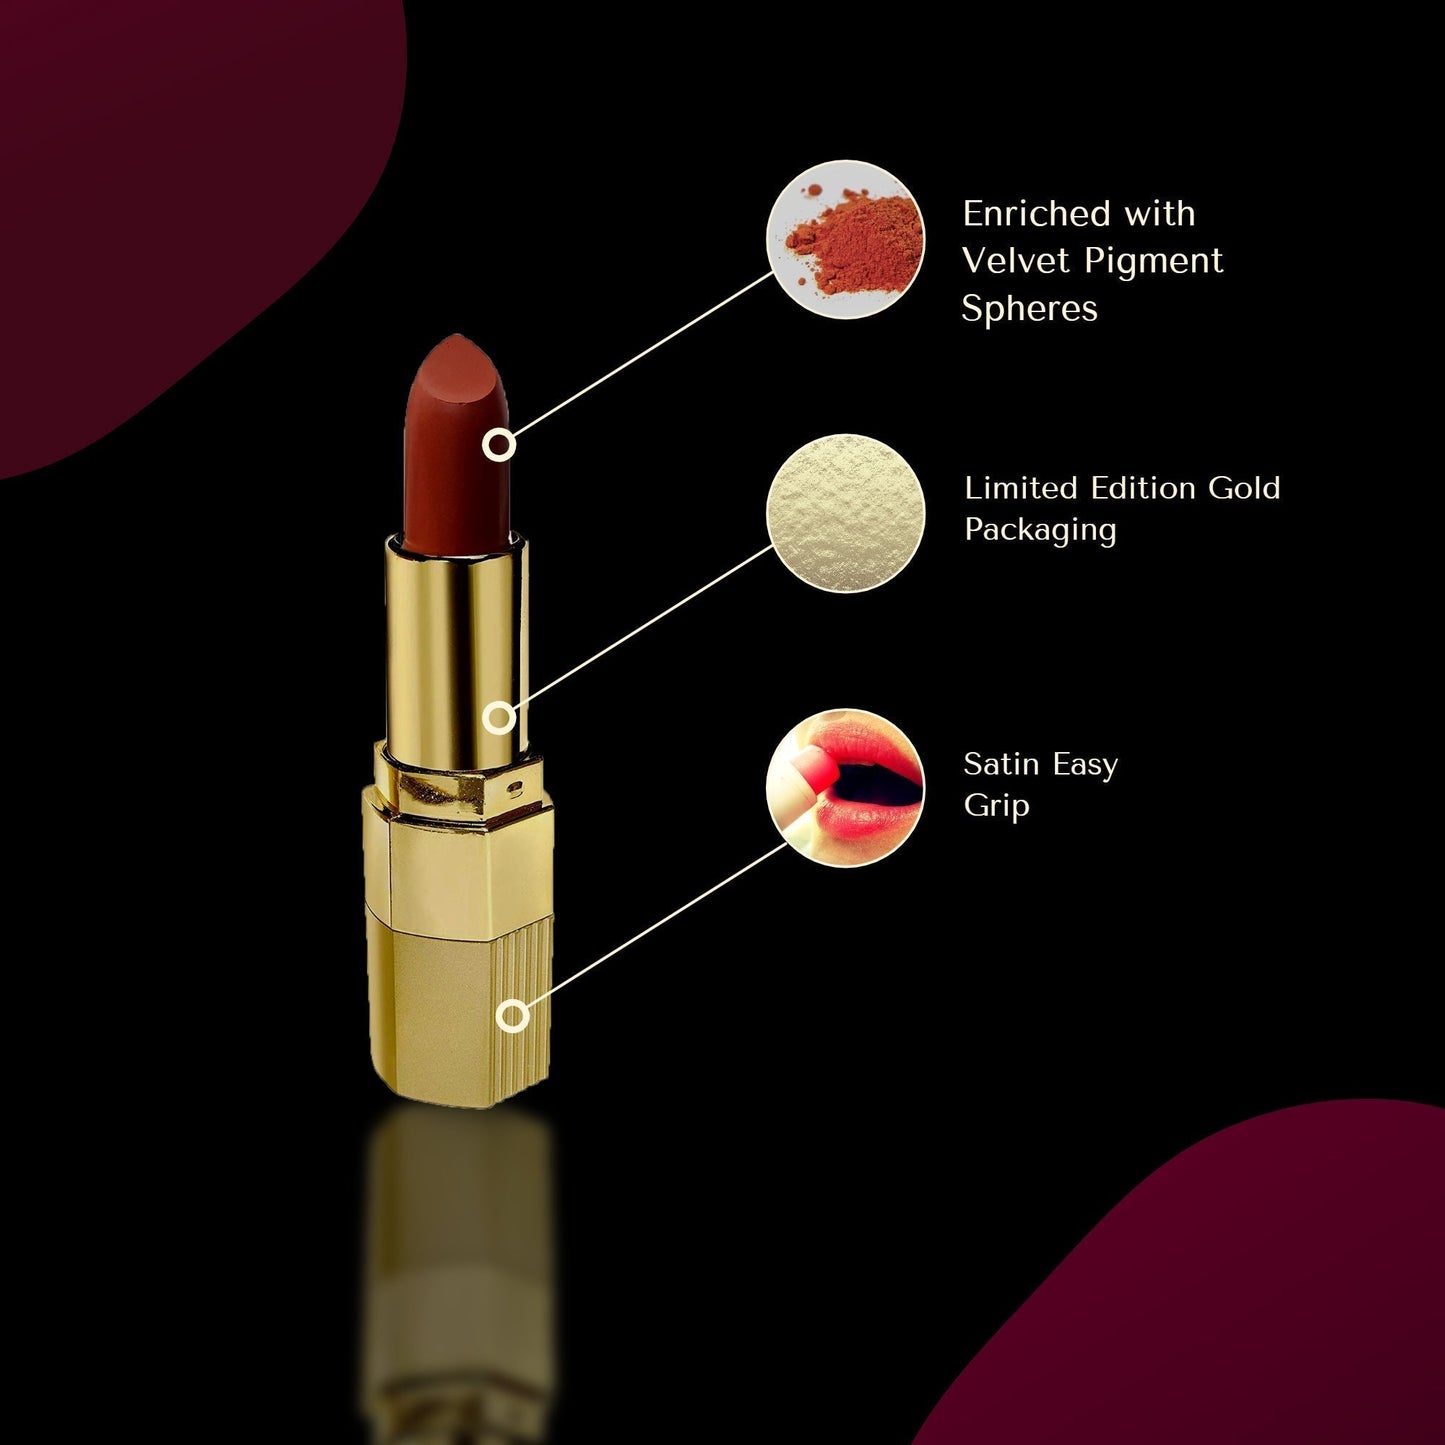 Krayons Desire Lipstick, Highly Pigmented, Longlasting, 3.5g Each, Combo, Pack of 2 (Caramel Brown, Magic Pink)